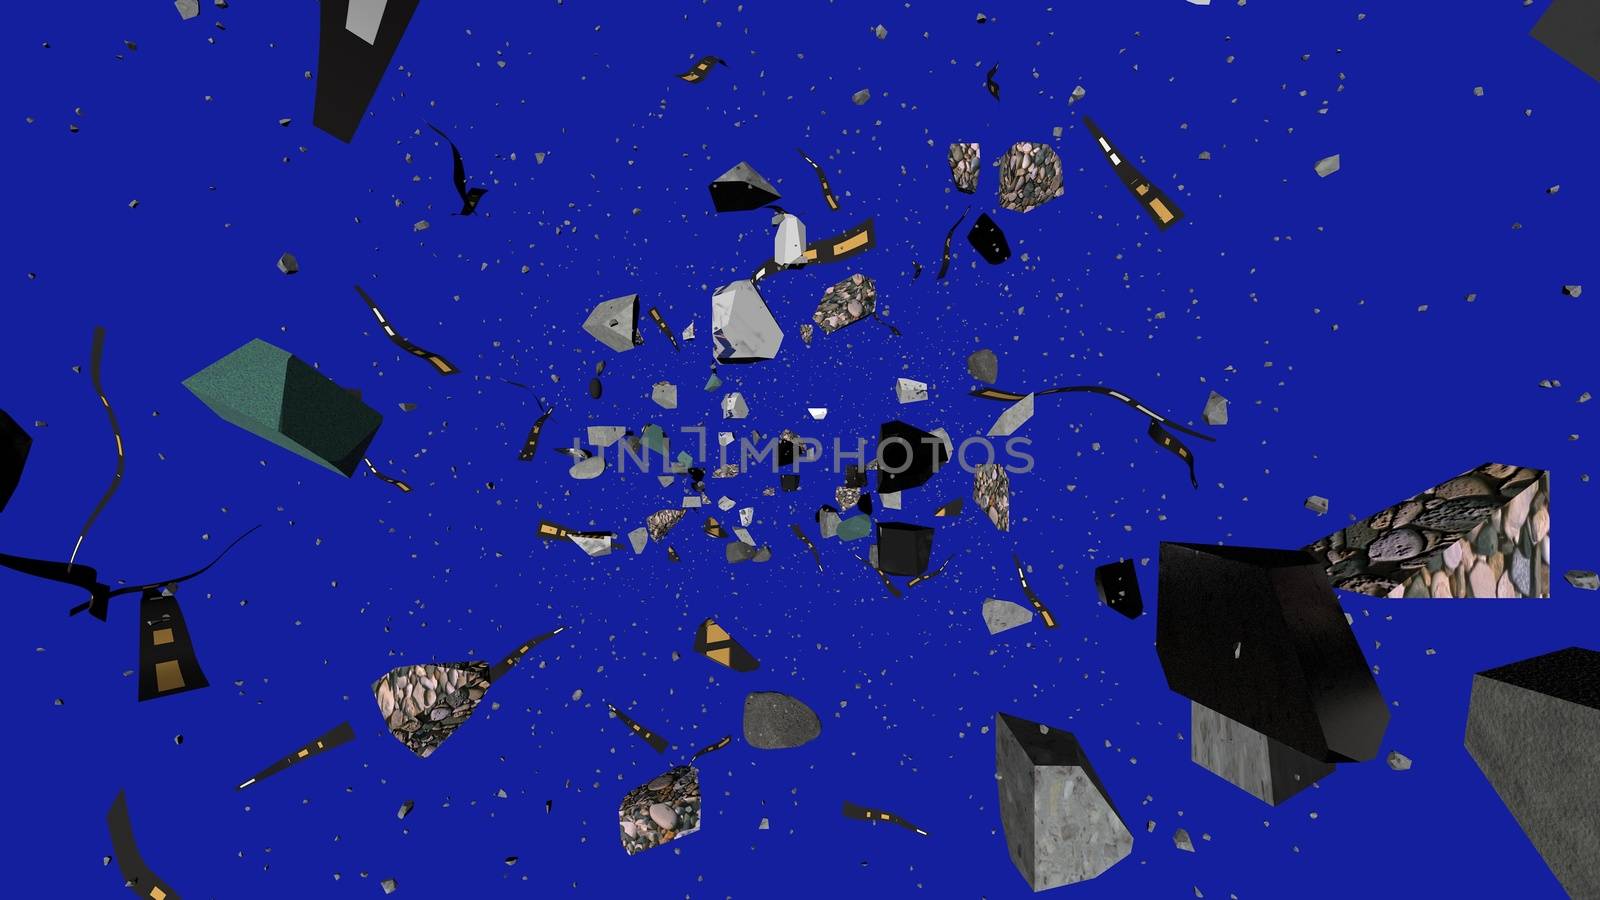 Stunning 3d illustration of black and grey stones and wreckage rushing towards sparkling stars in the dark blue universe. It looks impressive.